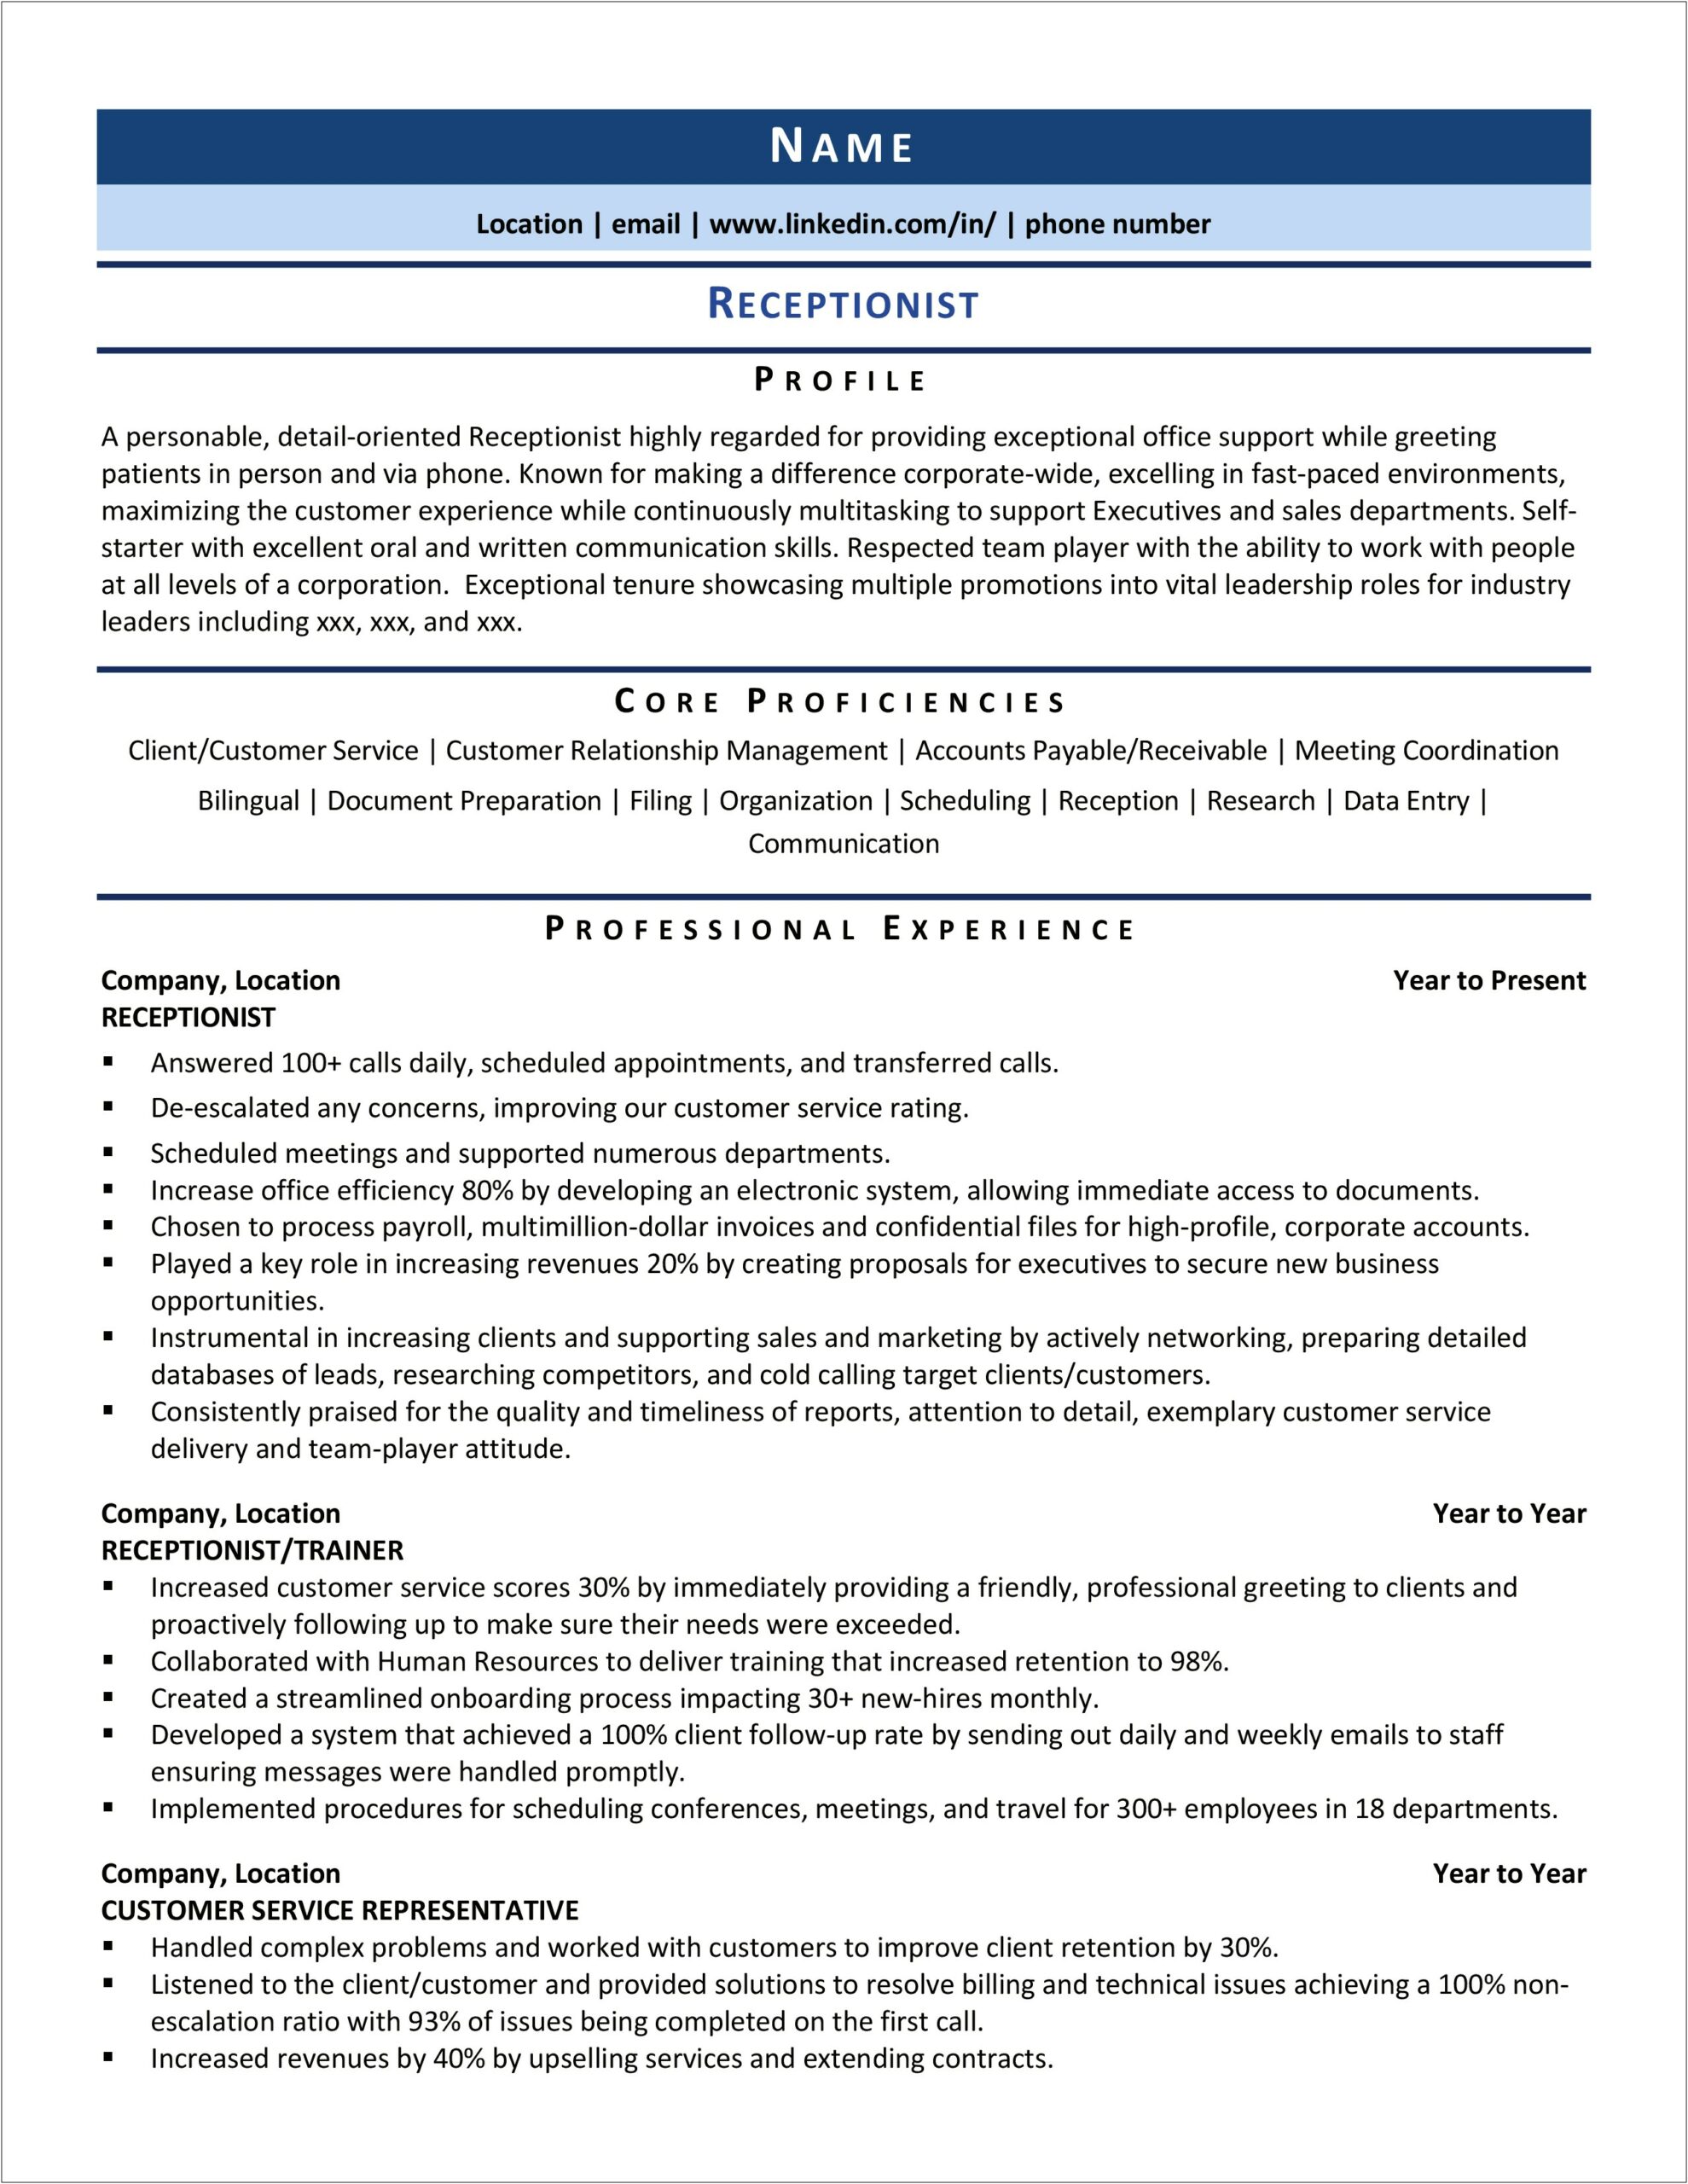 Receptionist Resume Skills And Abilities